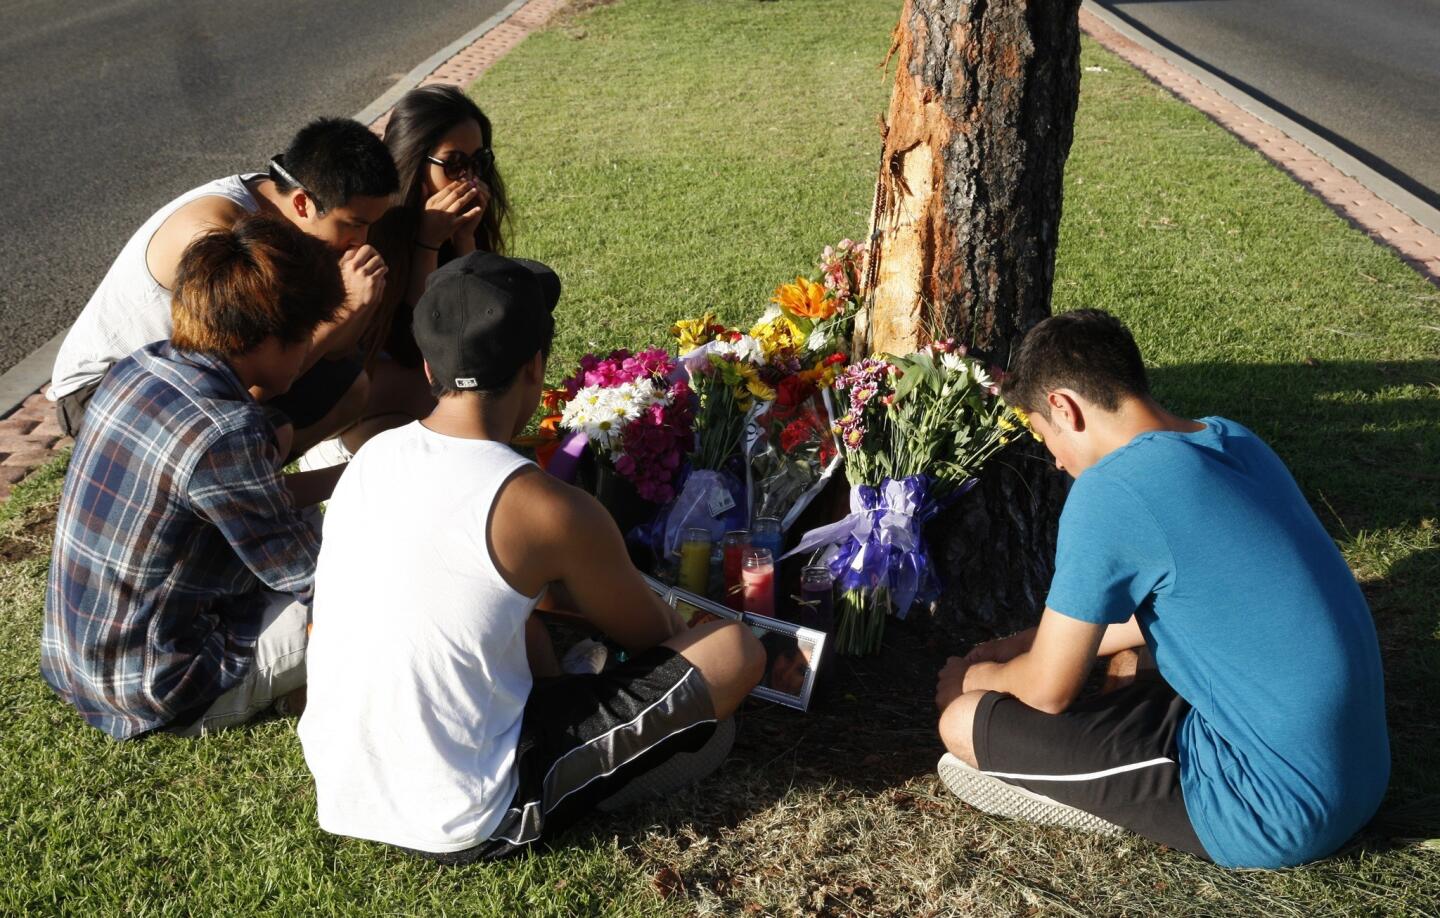 Cypress High School students, from left, Ramond Bada, 19; Josh Ong, 18; Alex Jamili, 17; Ian Song, 17; and Austin Milam, 17, mourn the loss of their friend, Irvine High School senior Robin Cabrera, 17. Robin was one of five teens killed in a fiery single-vehicle crash with a tree on a downhill stretch of Jamboree Road near Island Lagoon Drive on Memorial Day in Newport Beach.